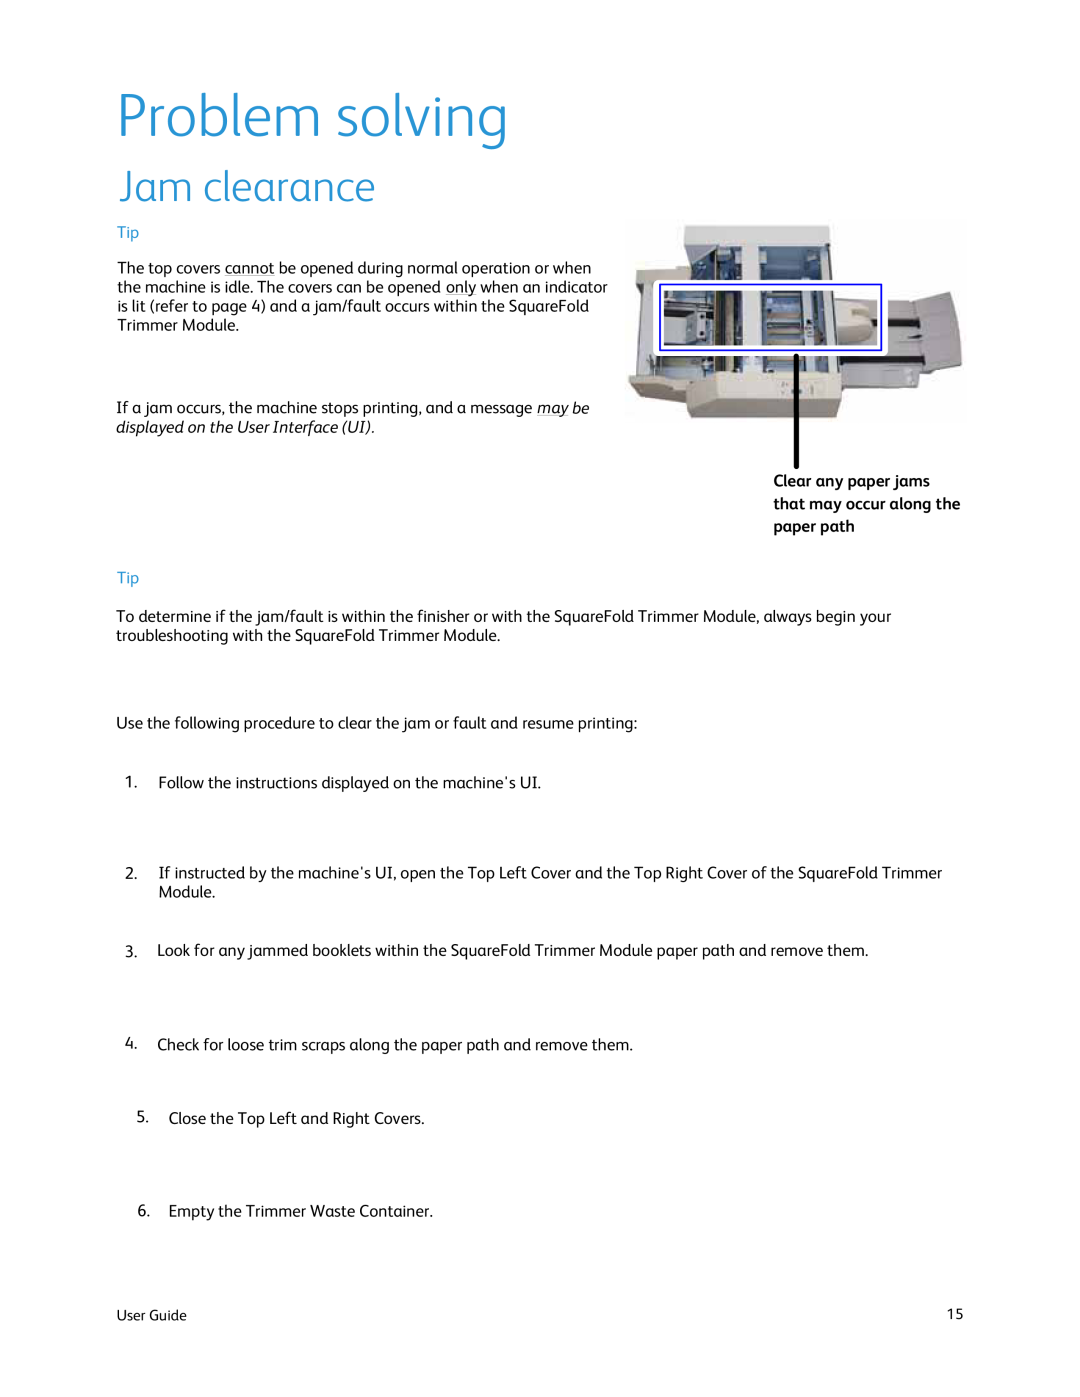 Xerox SquareFold Trimmer manual Problem solving, Jam clearance, Clear any paper jams that may occur along the paper path 